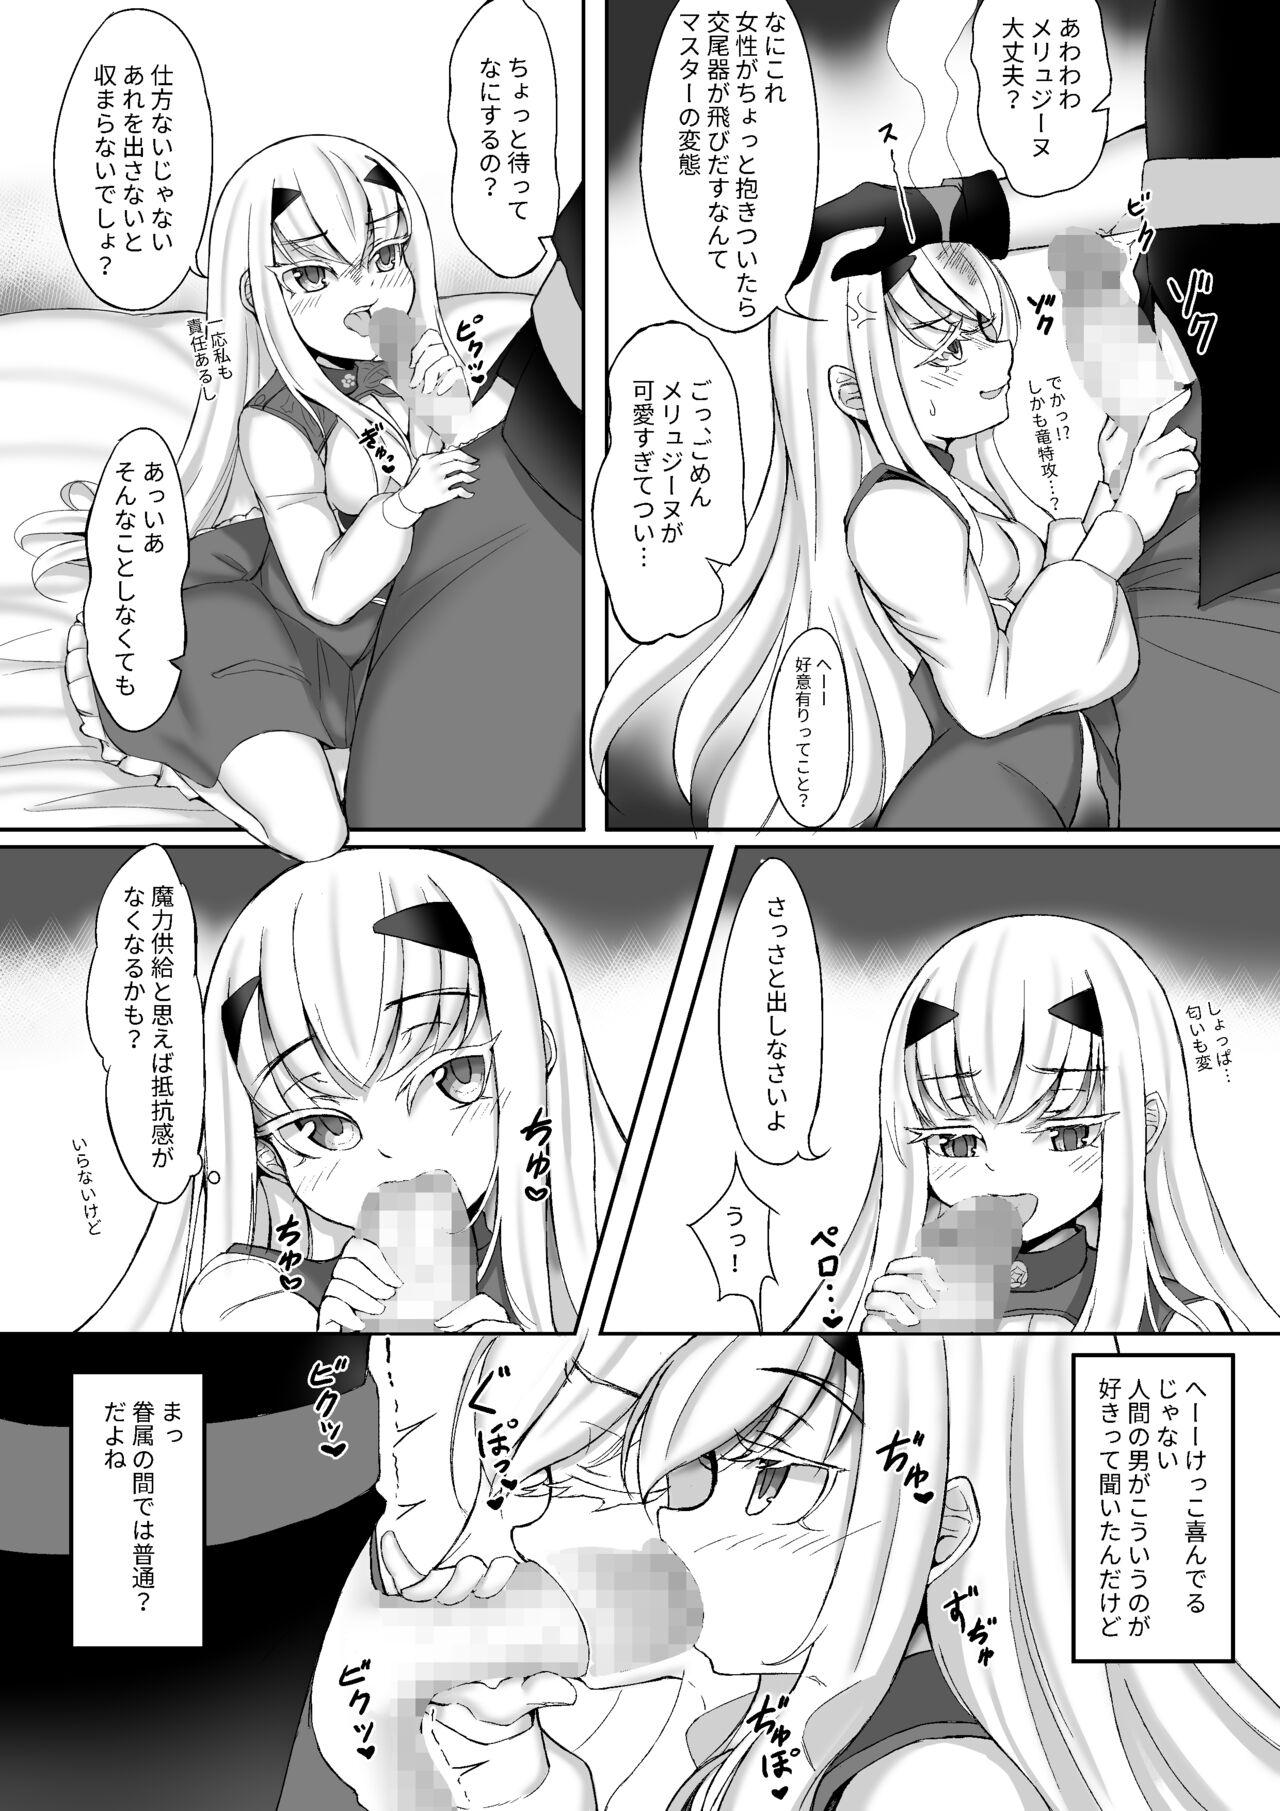 Jerkoff FujiMelu Maryoku Kyoukyuu Love One Another - Fate grand order Pussy Lick - Page 9